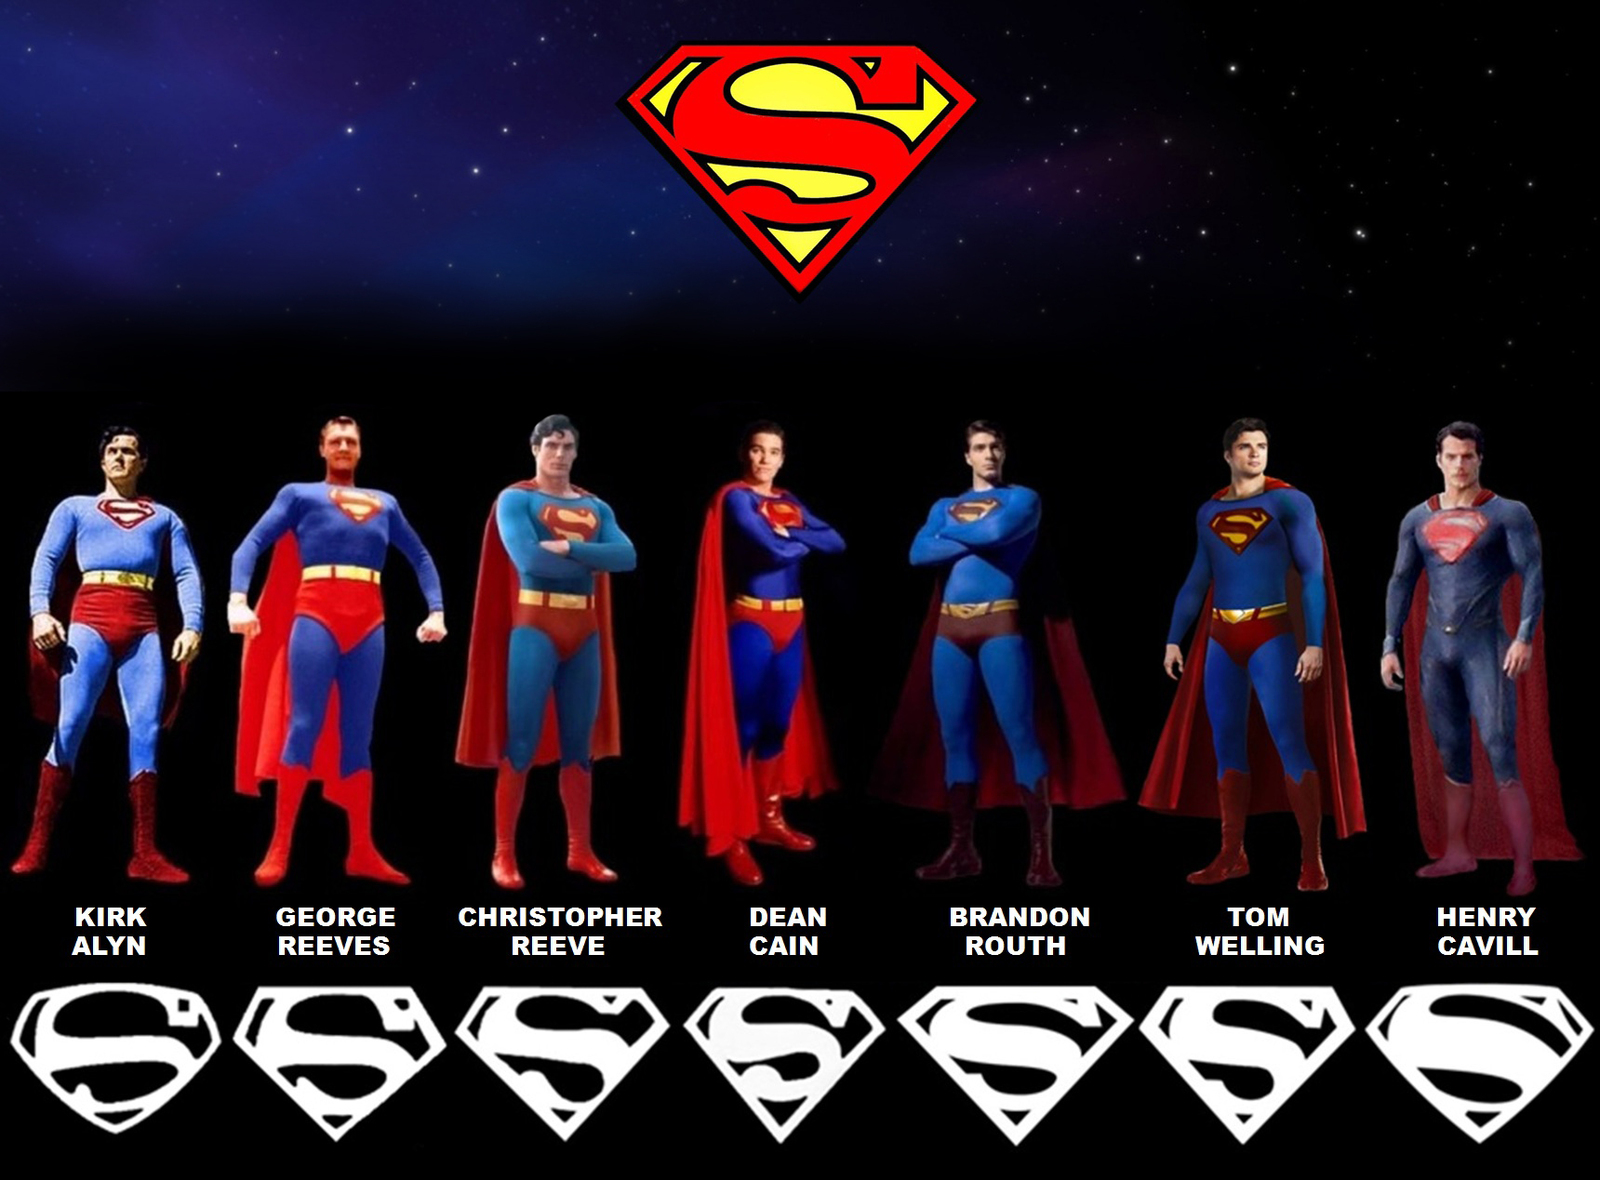 Download Superman Wallpaper For Android #gsdt5 > Mlebu